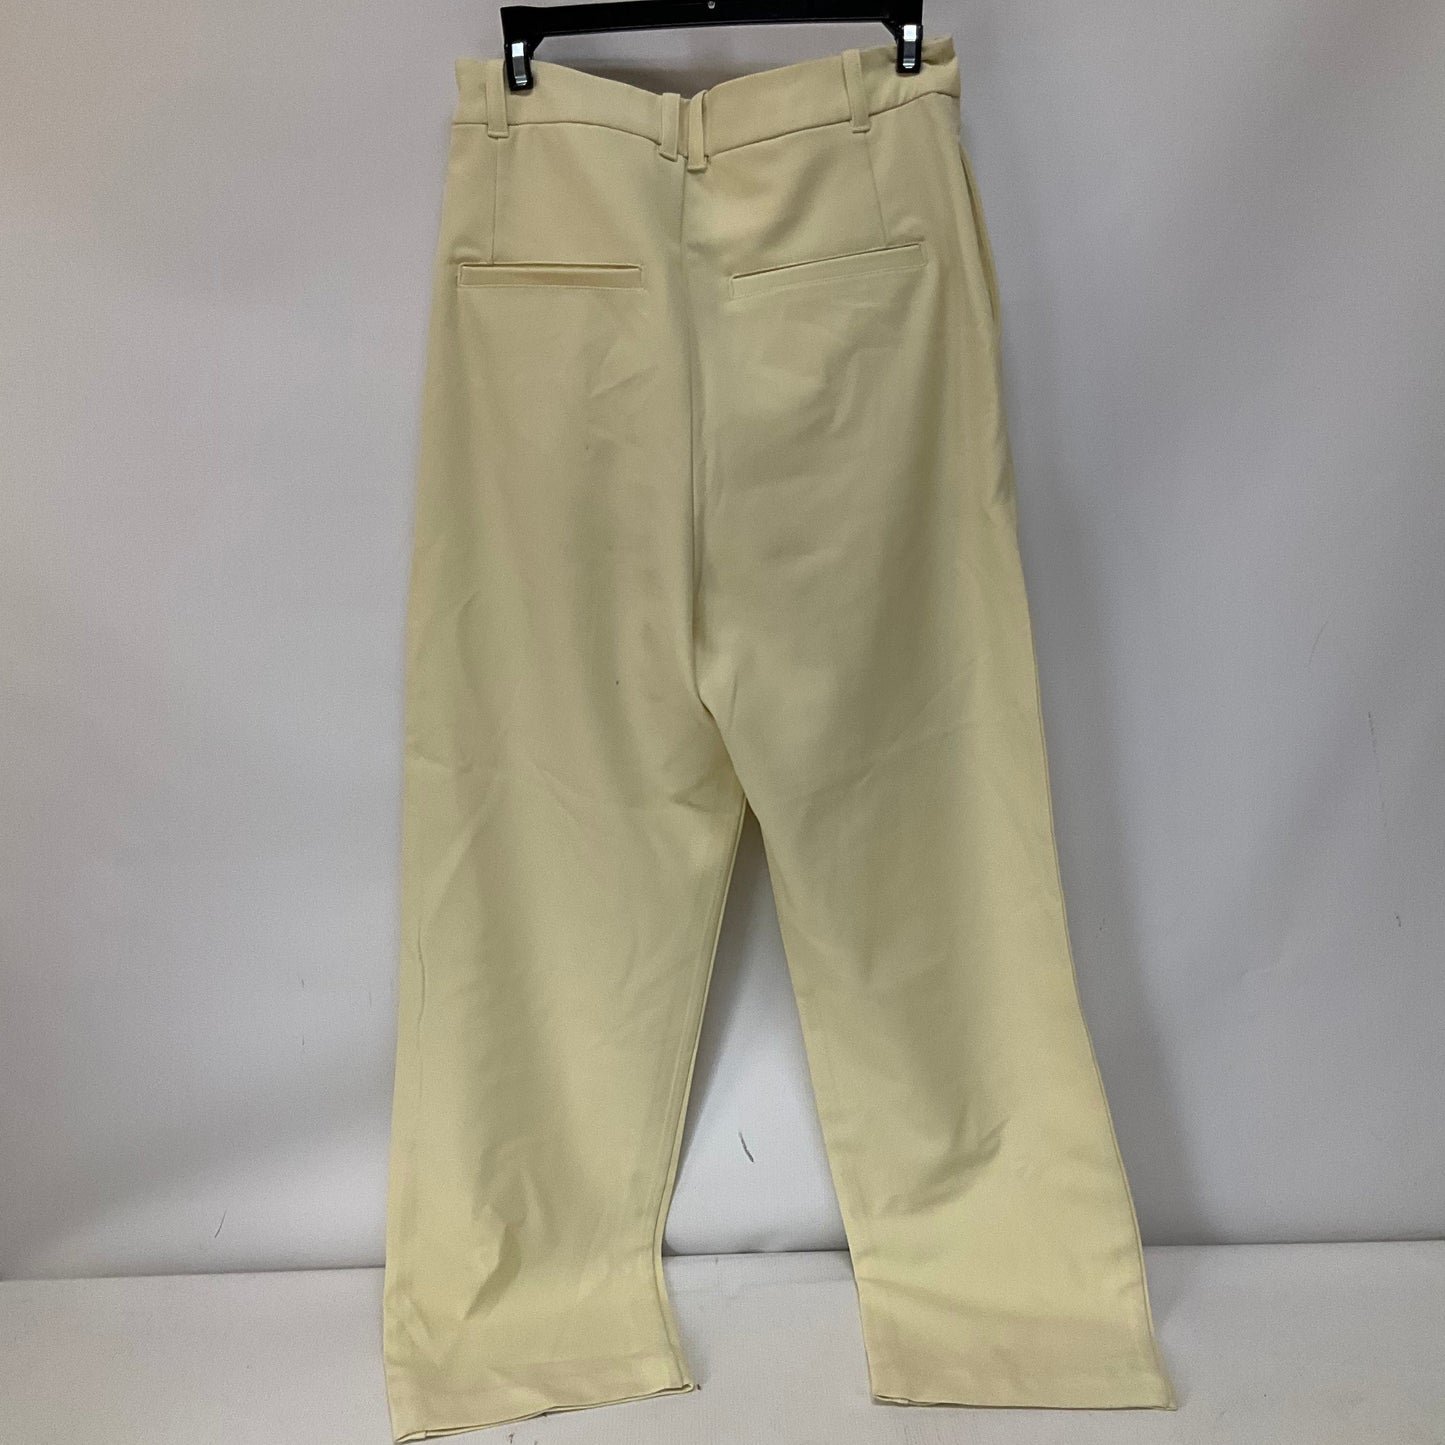 Yellow Pants Other Free People, Size 6